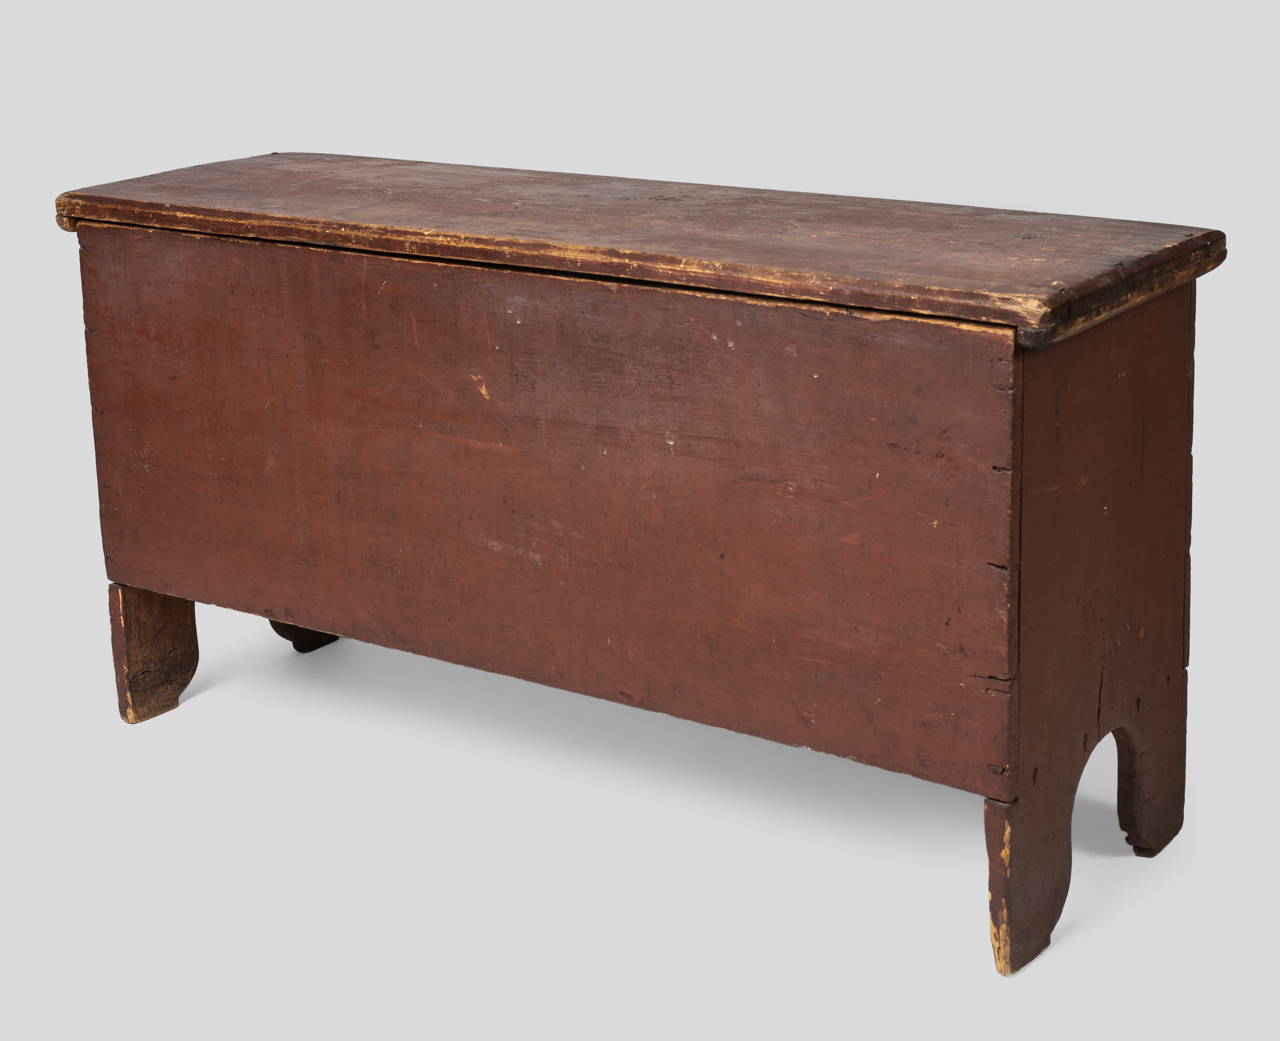 A small early six board chest